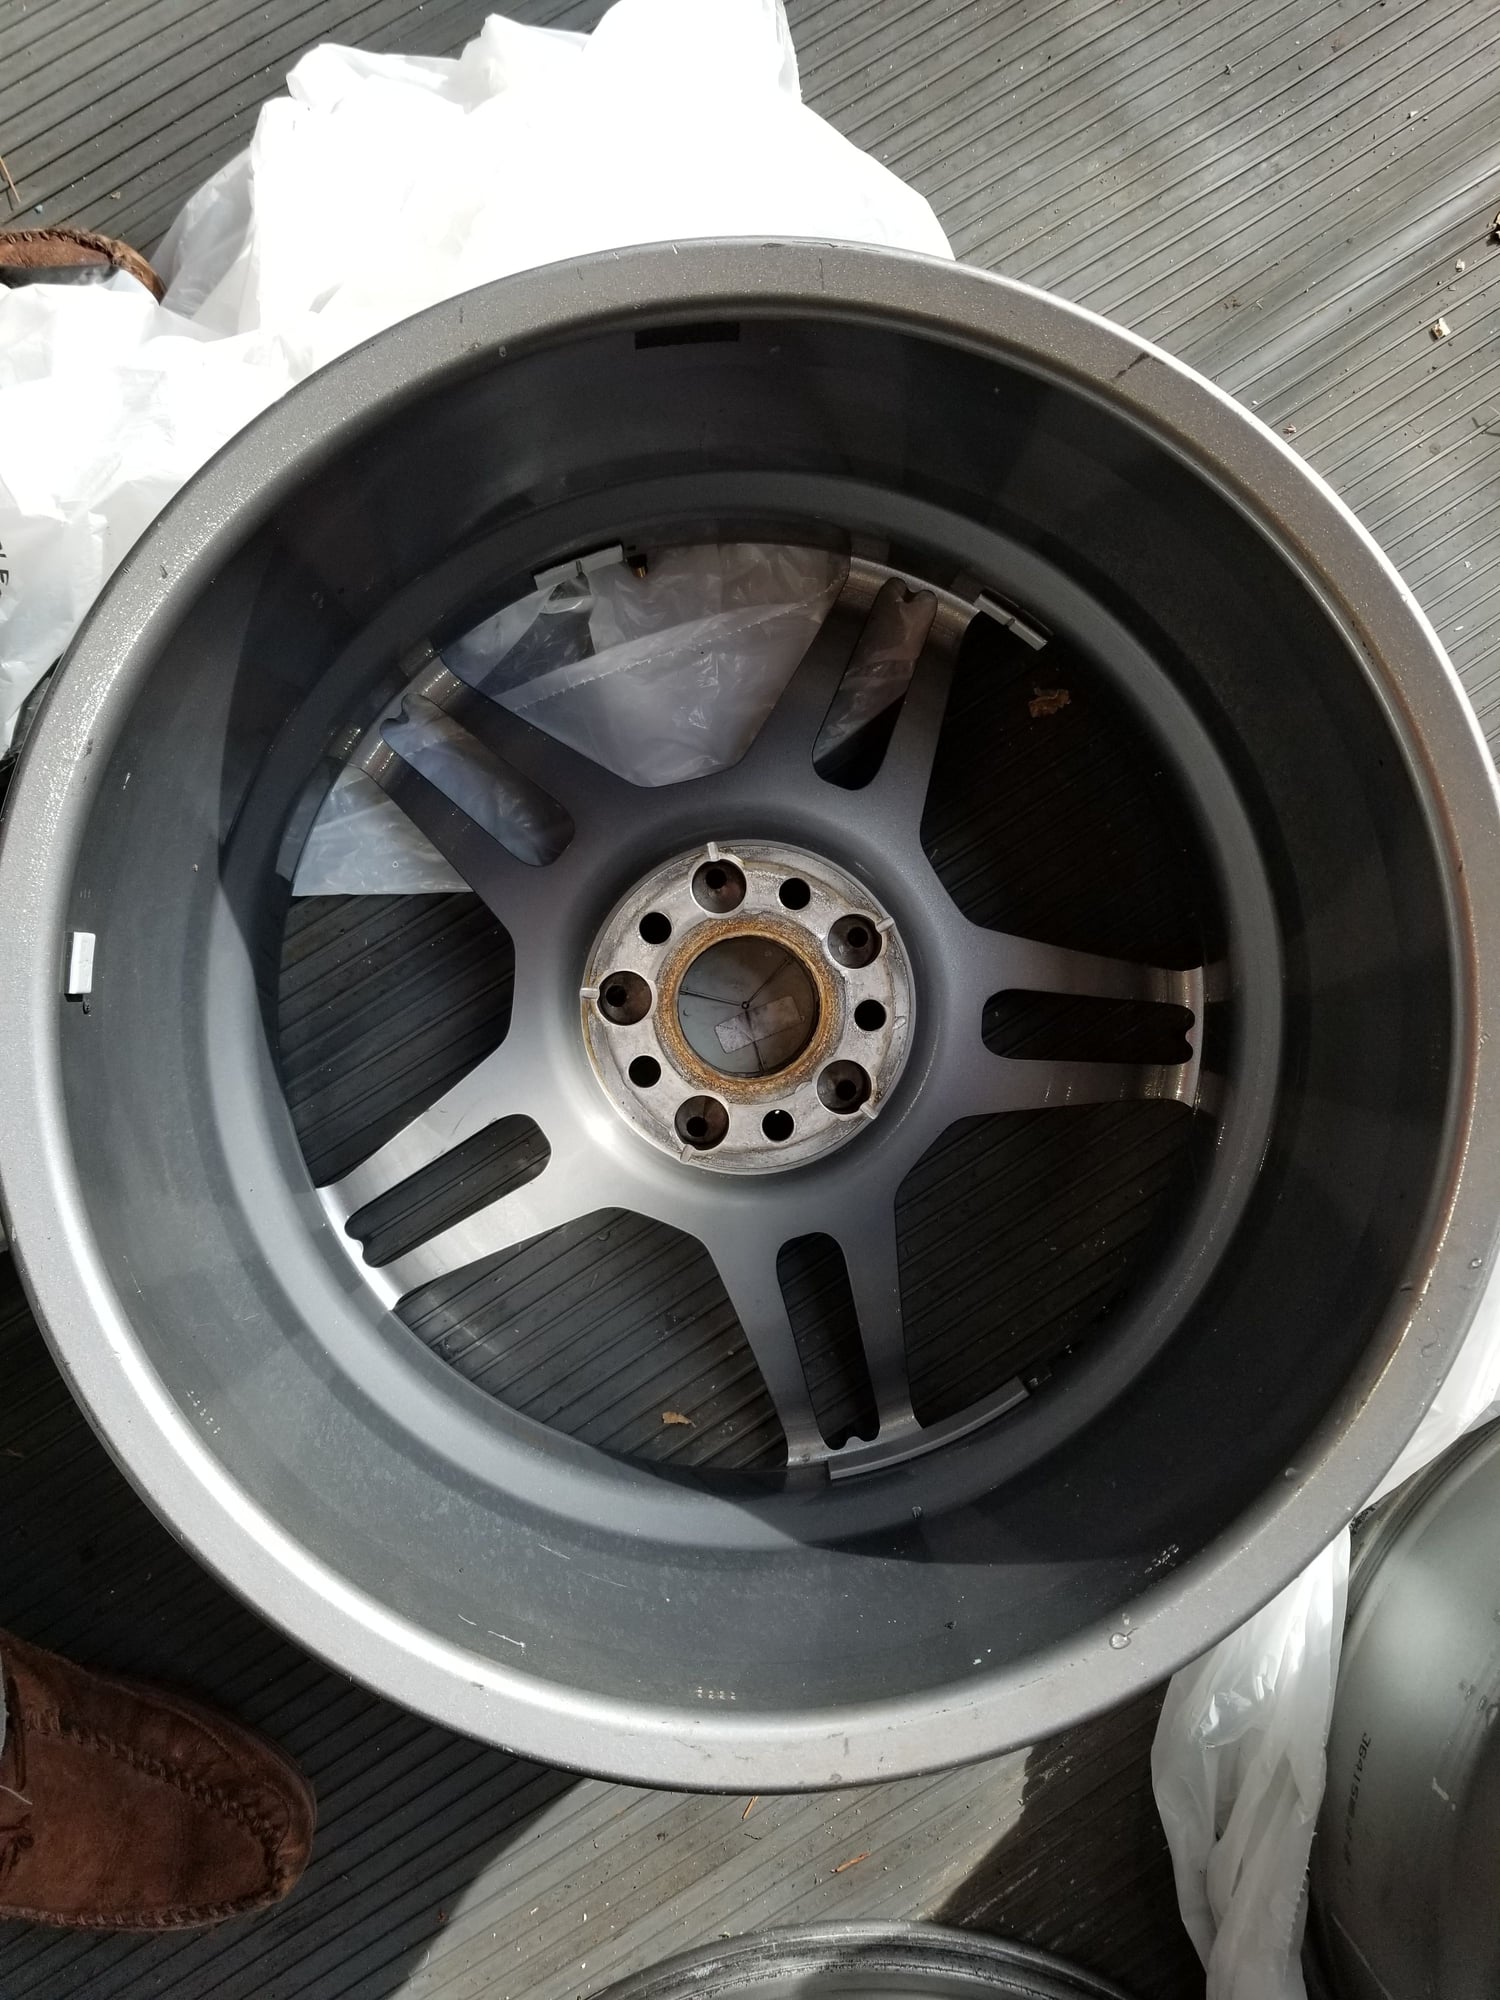 Wheels and Tires/Axles - 212 E63 OE wheels - Used - 2010 to 2013 Mercedes-Benz E63 AMG - Macon, GA 31204, United States